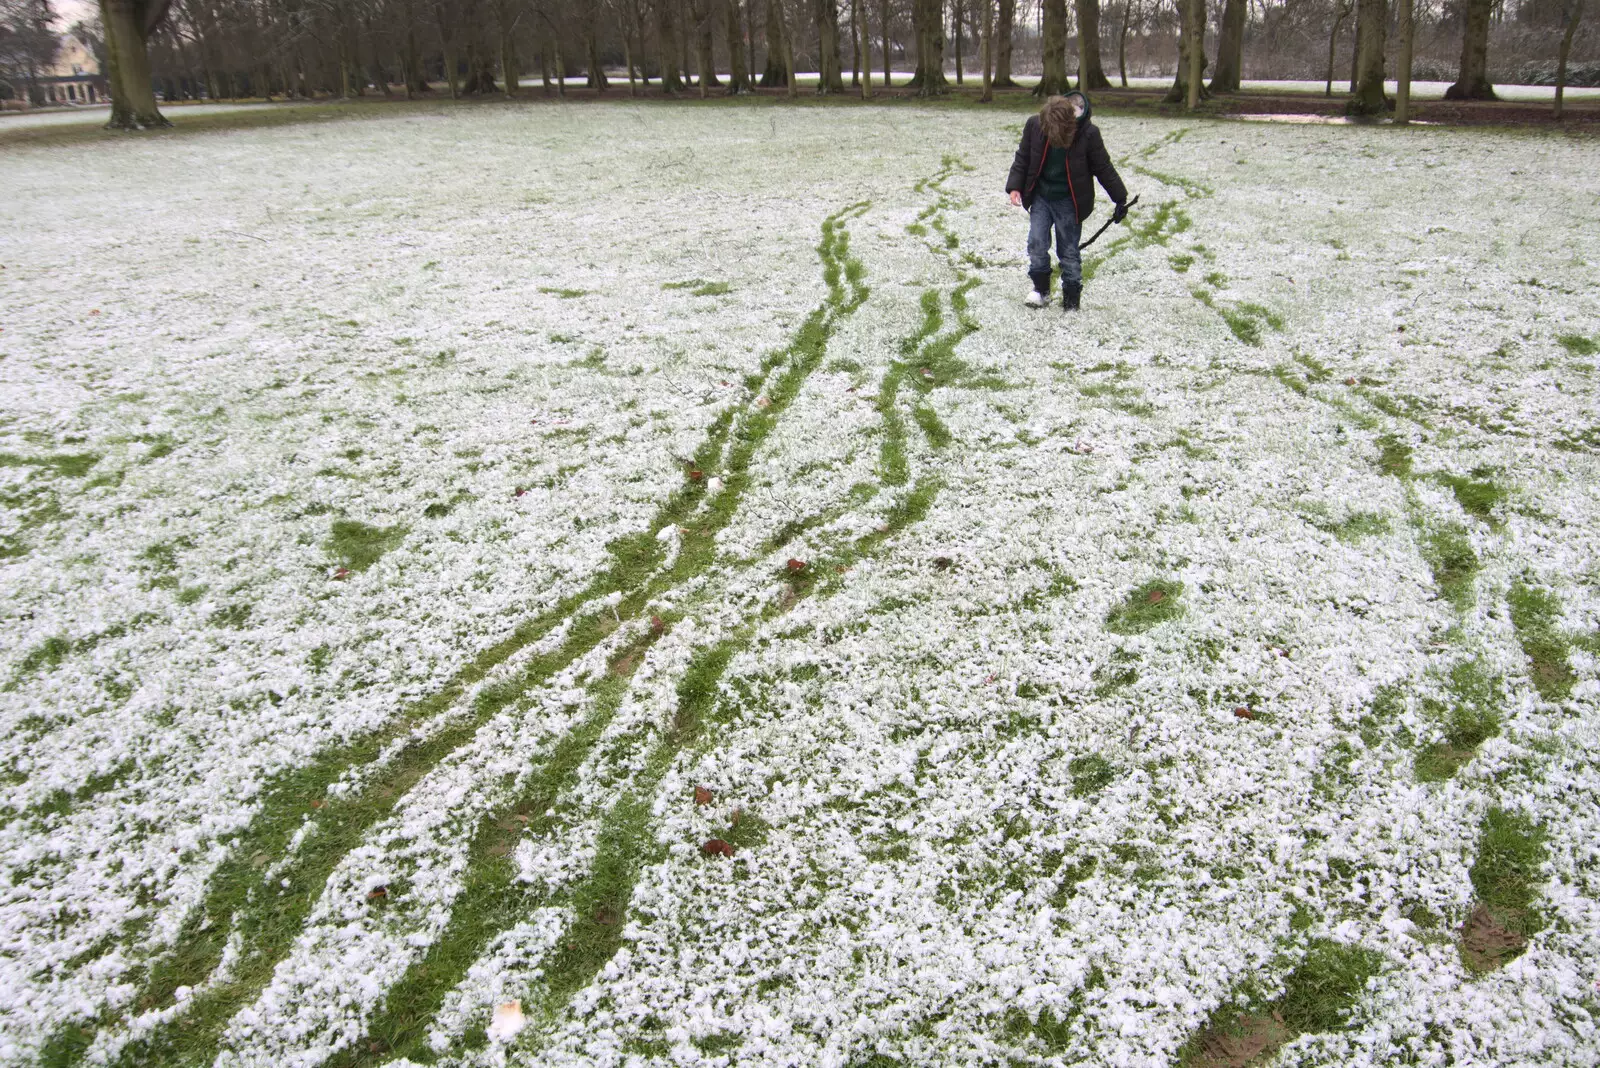 Trails of footsteps, from Winter Lockdown Walks, Thrandeston and Brome, Suffolk - 24th January 2021